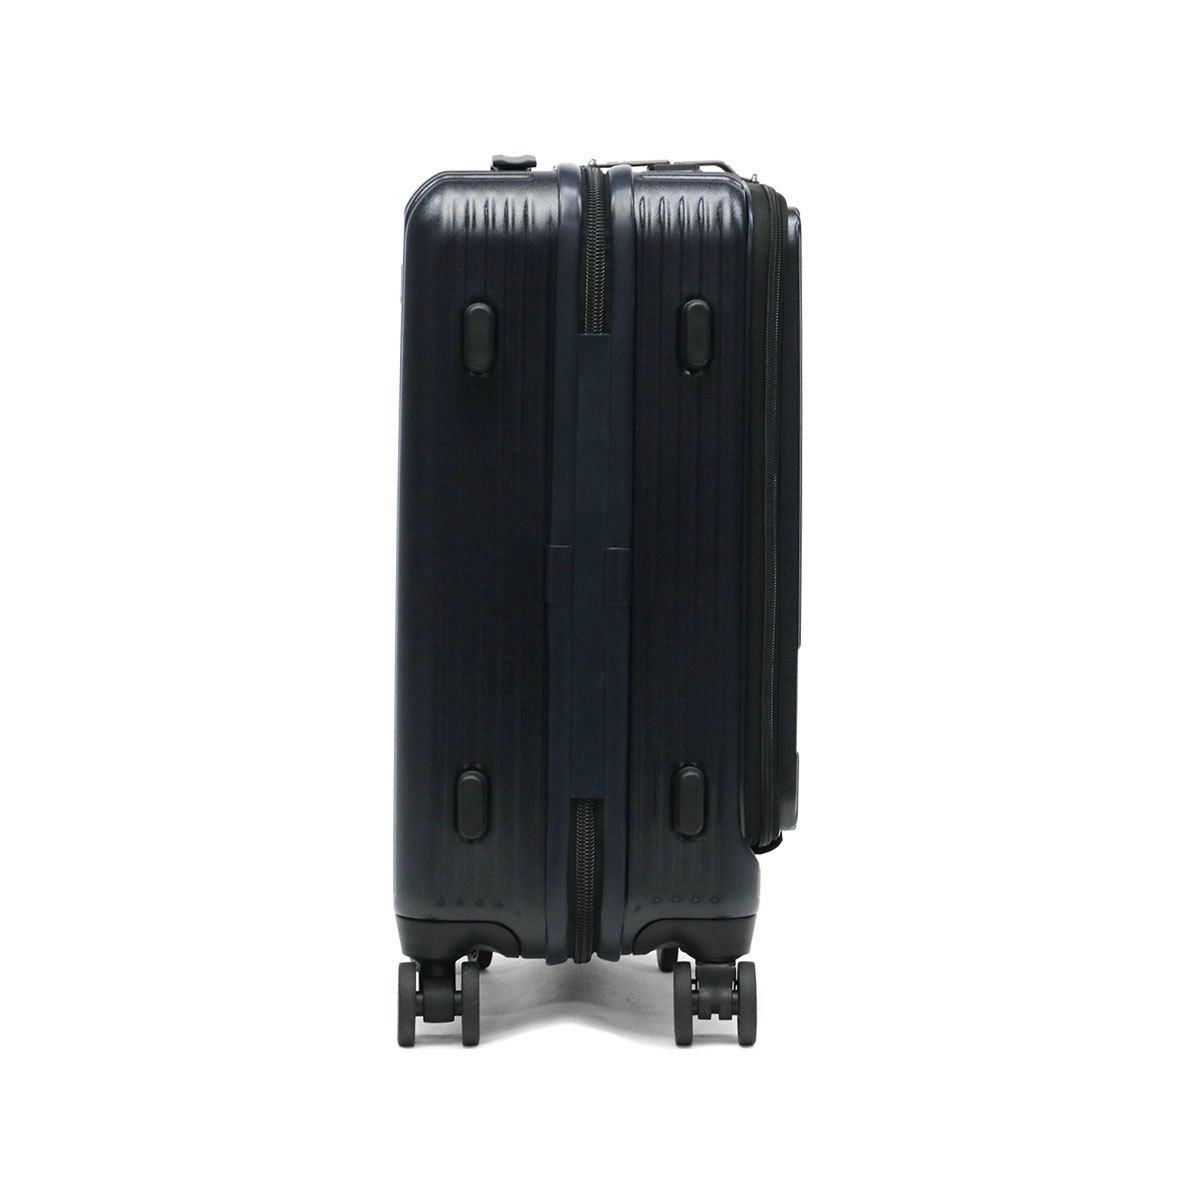  maximum 41%*6/2 limitation regular goods 2 year guarantee ino Beta - suitcase machine inside bringing in 1.2.innovator light weight small size front open stopper Carry case INV50